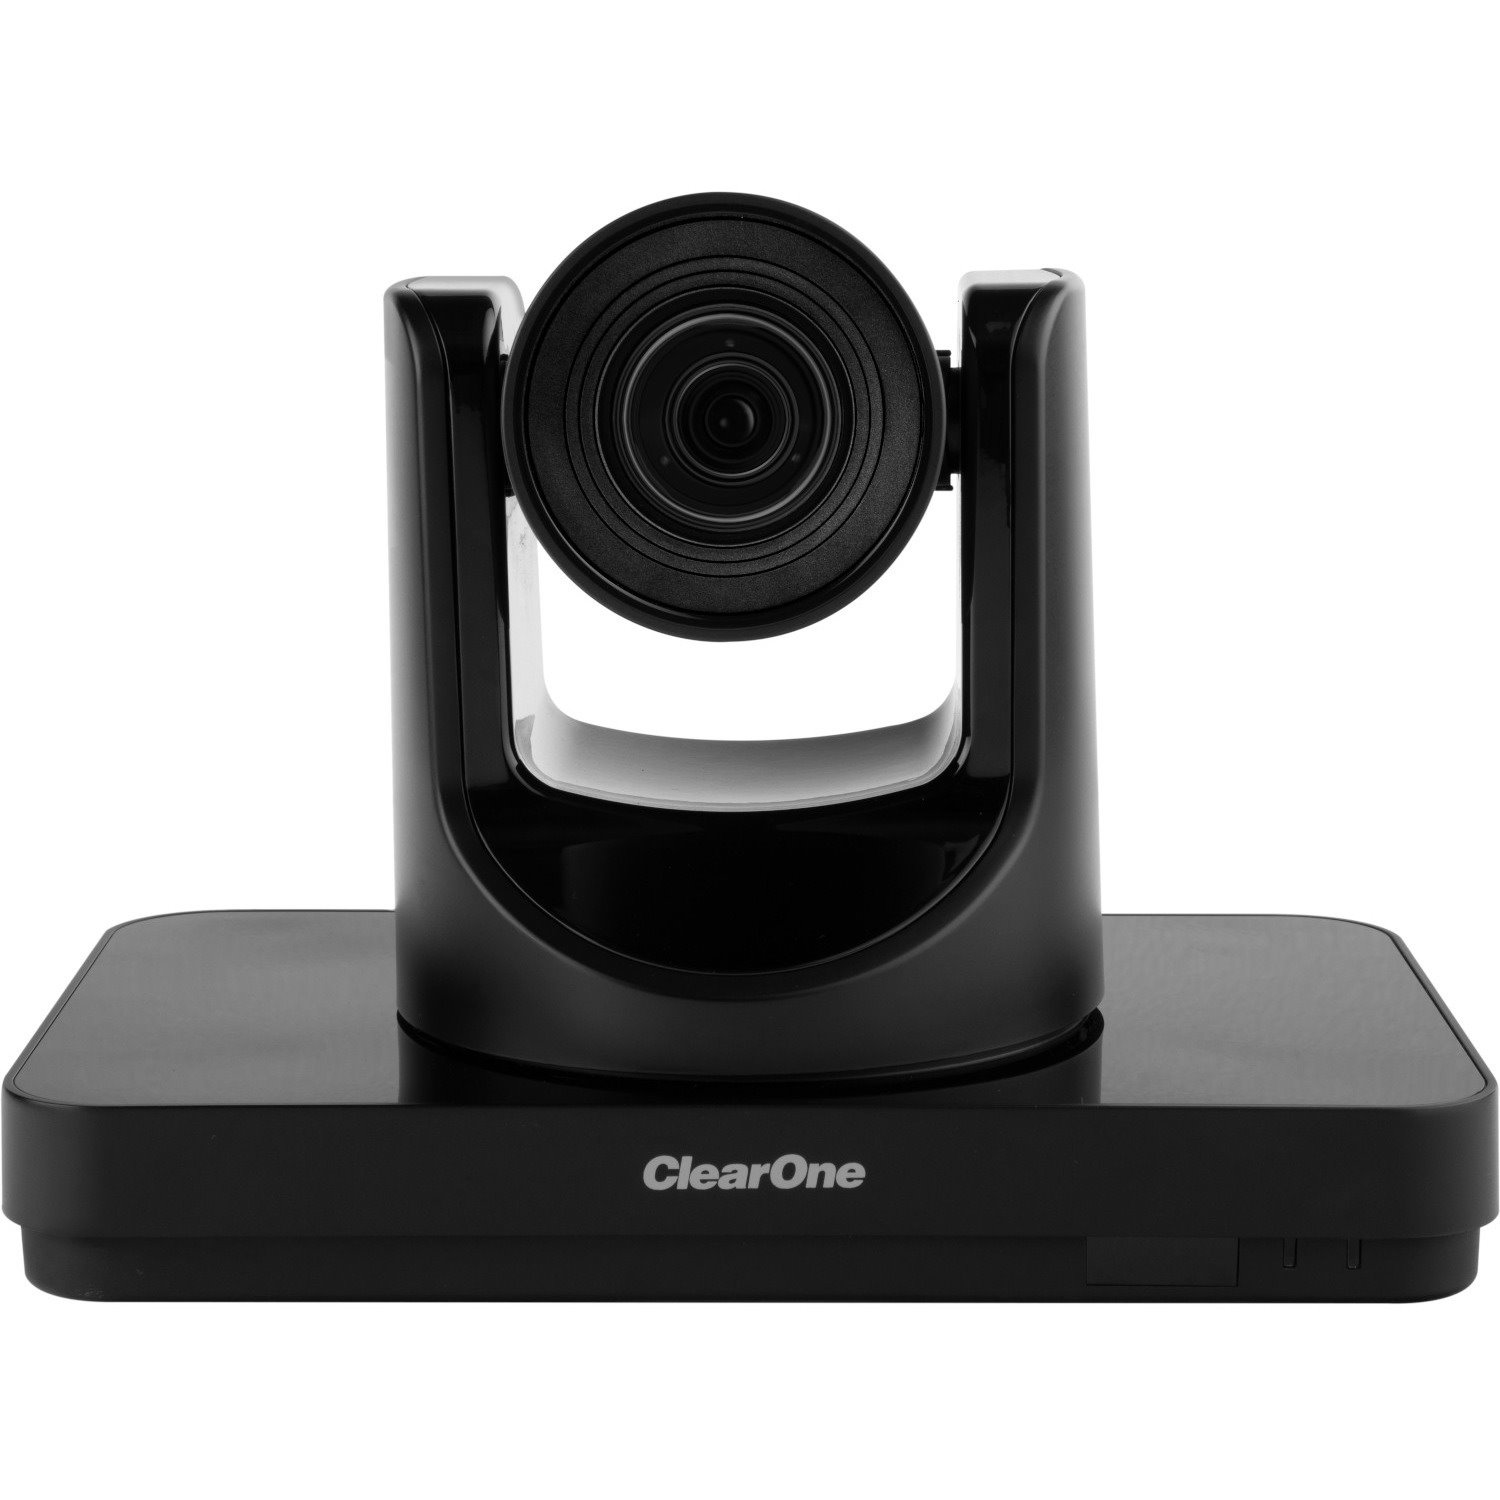 ClearOne UNITE 200 Pro Video Conferencing Camera - 2.1 Megapixel - 60 fps - Black, Silver - USB 3.0 Type B